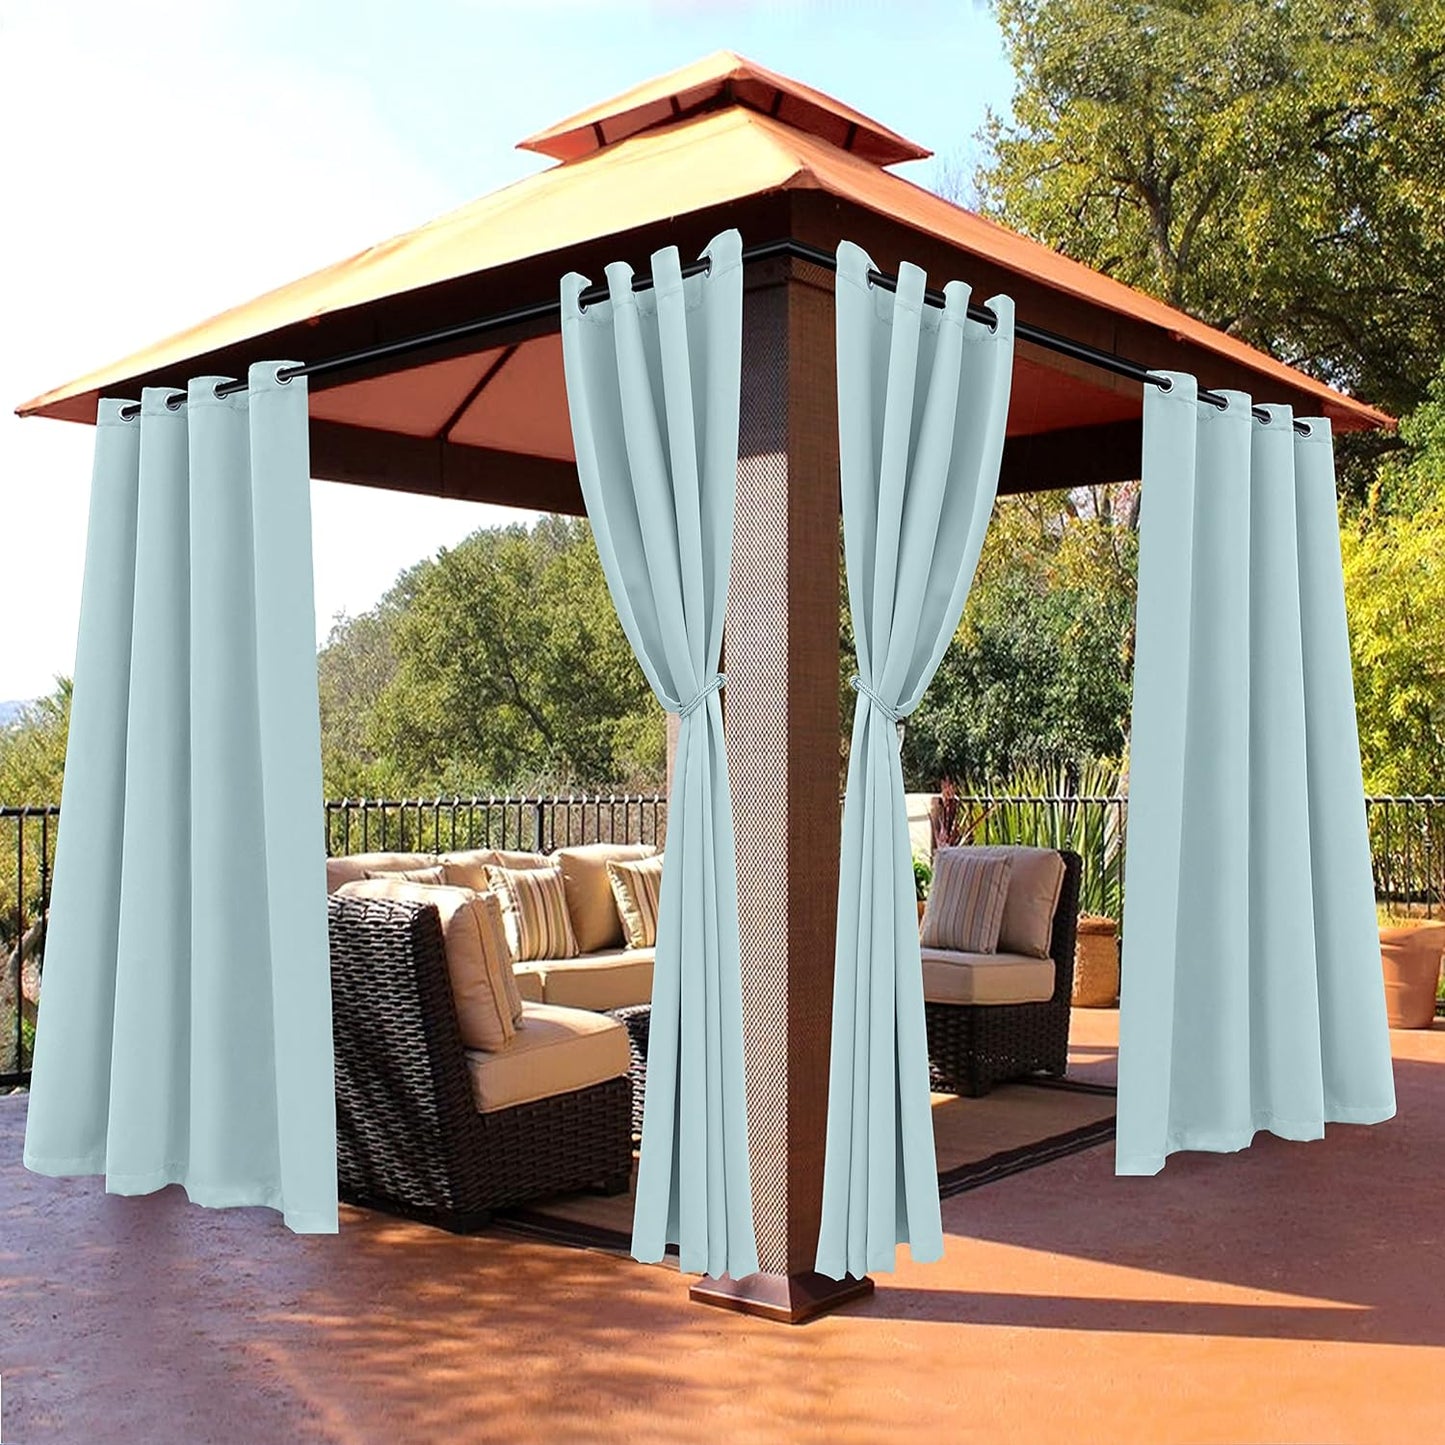 BONZER Outdoor Curtains for Patio Waterproof - Light Blocking Weather Resistant Privacy Grommet Blackout Curtains for Gazebo, Porch, Pergola, Cabana, Deck, Sunroom, 1 Panel, 52W X 84L Inch, Silver  BONZER Seafoam 52W X 84 Inch 